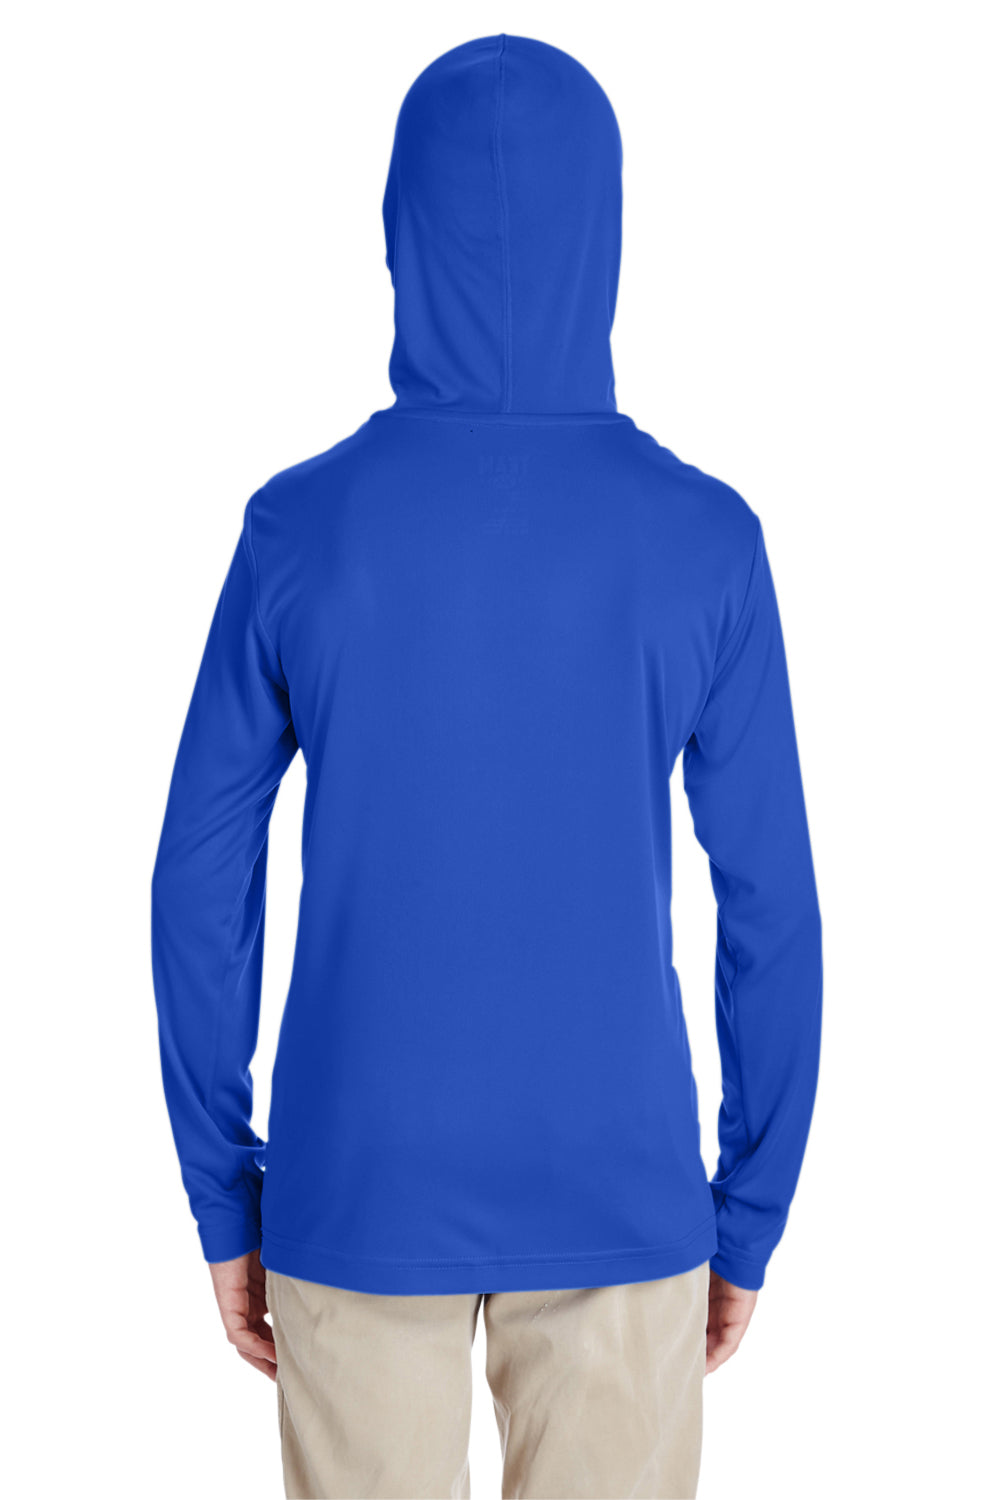 Team 365 TT41Y Youth Zone Performance Moisture Wicking Long Sleeve Hooded T-Shirt Hoodie Royal Blue Back